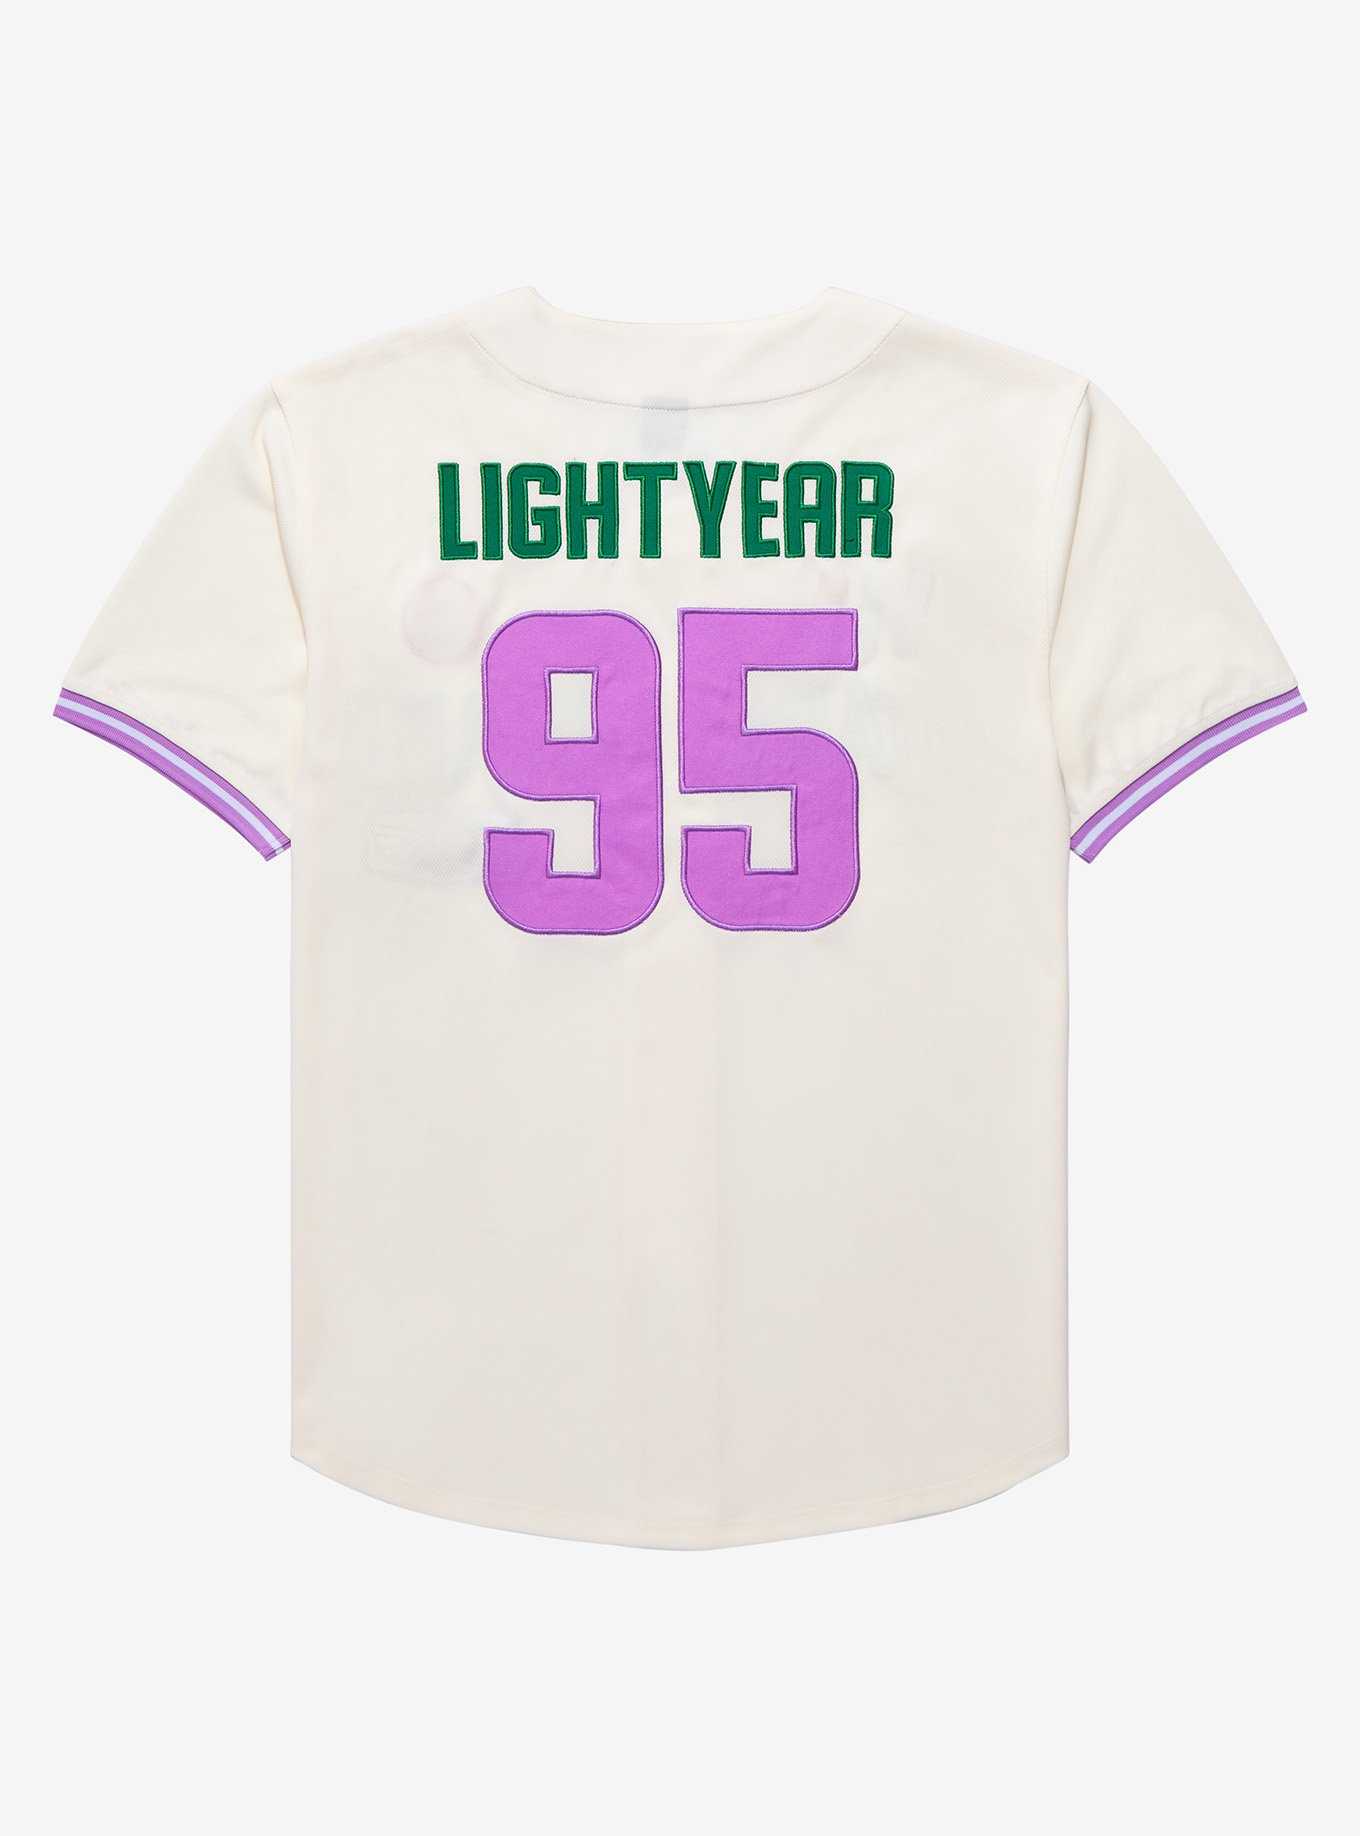 Our Universe Disney Pixar Toy Story Buzz Lightyear Star Command Baseball Jersey - BoxLunch Exclusive, , hi-res